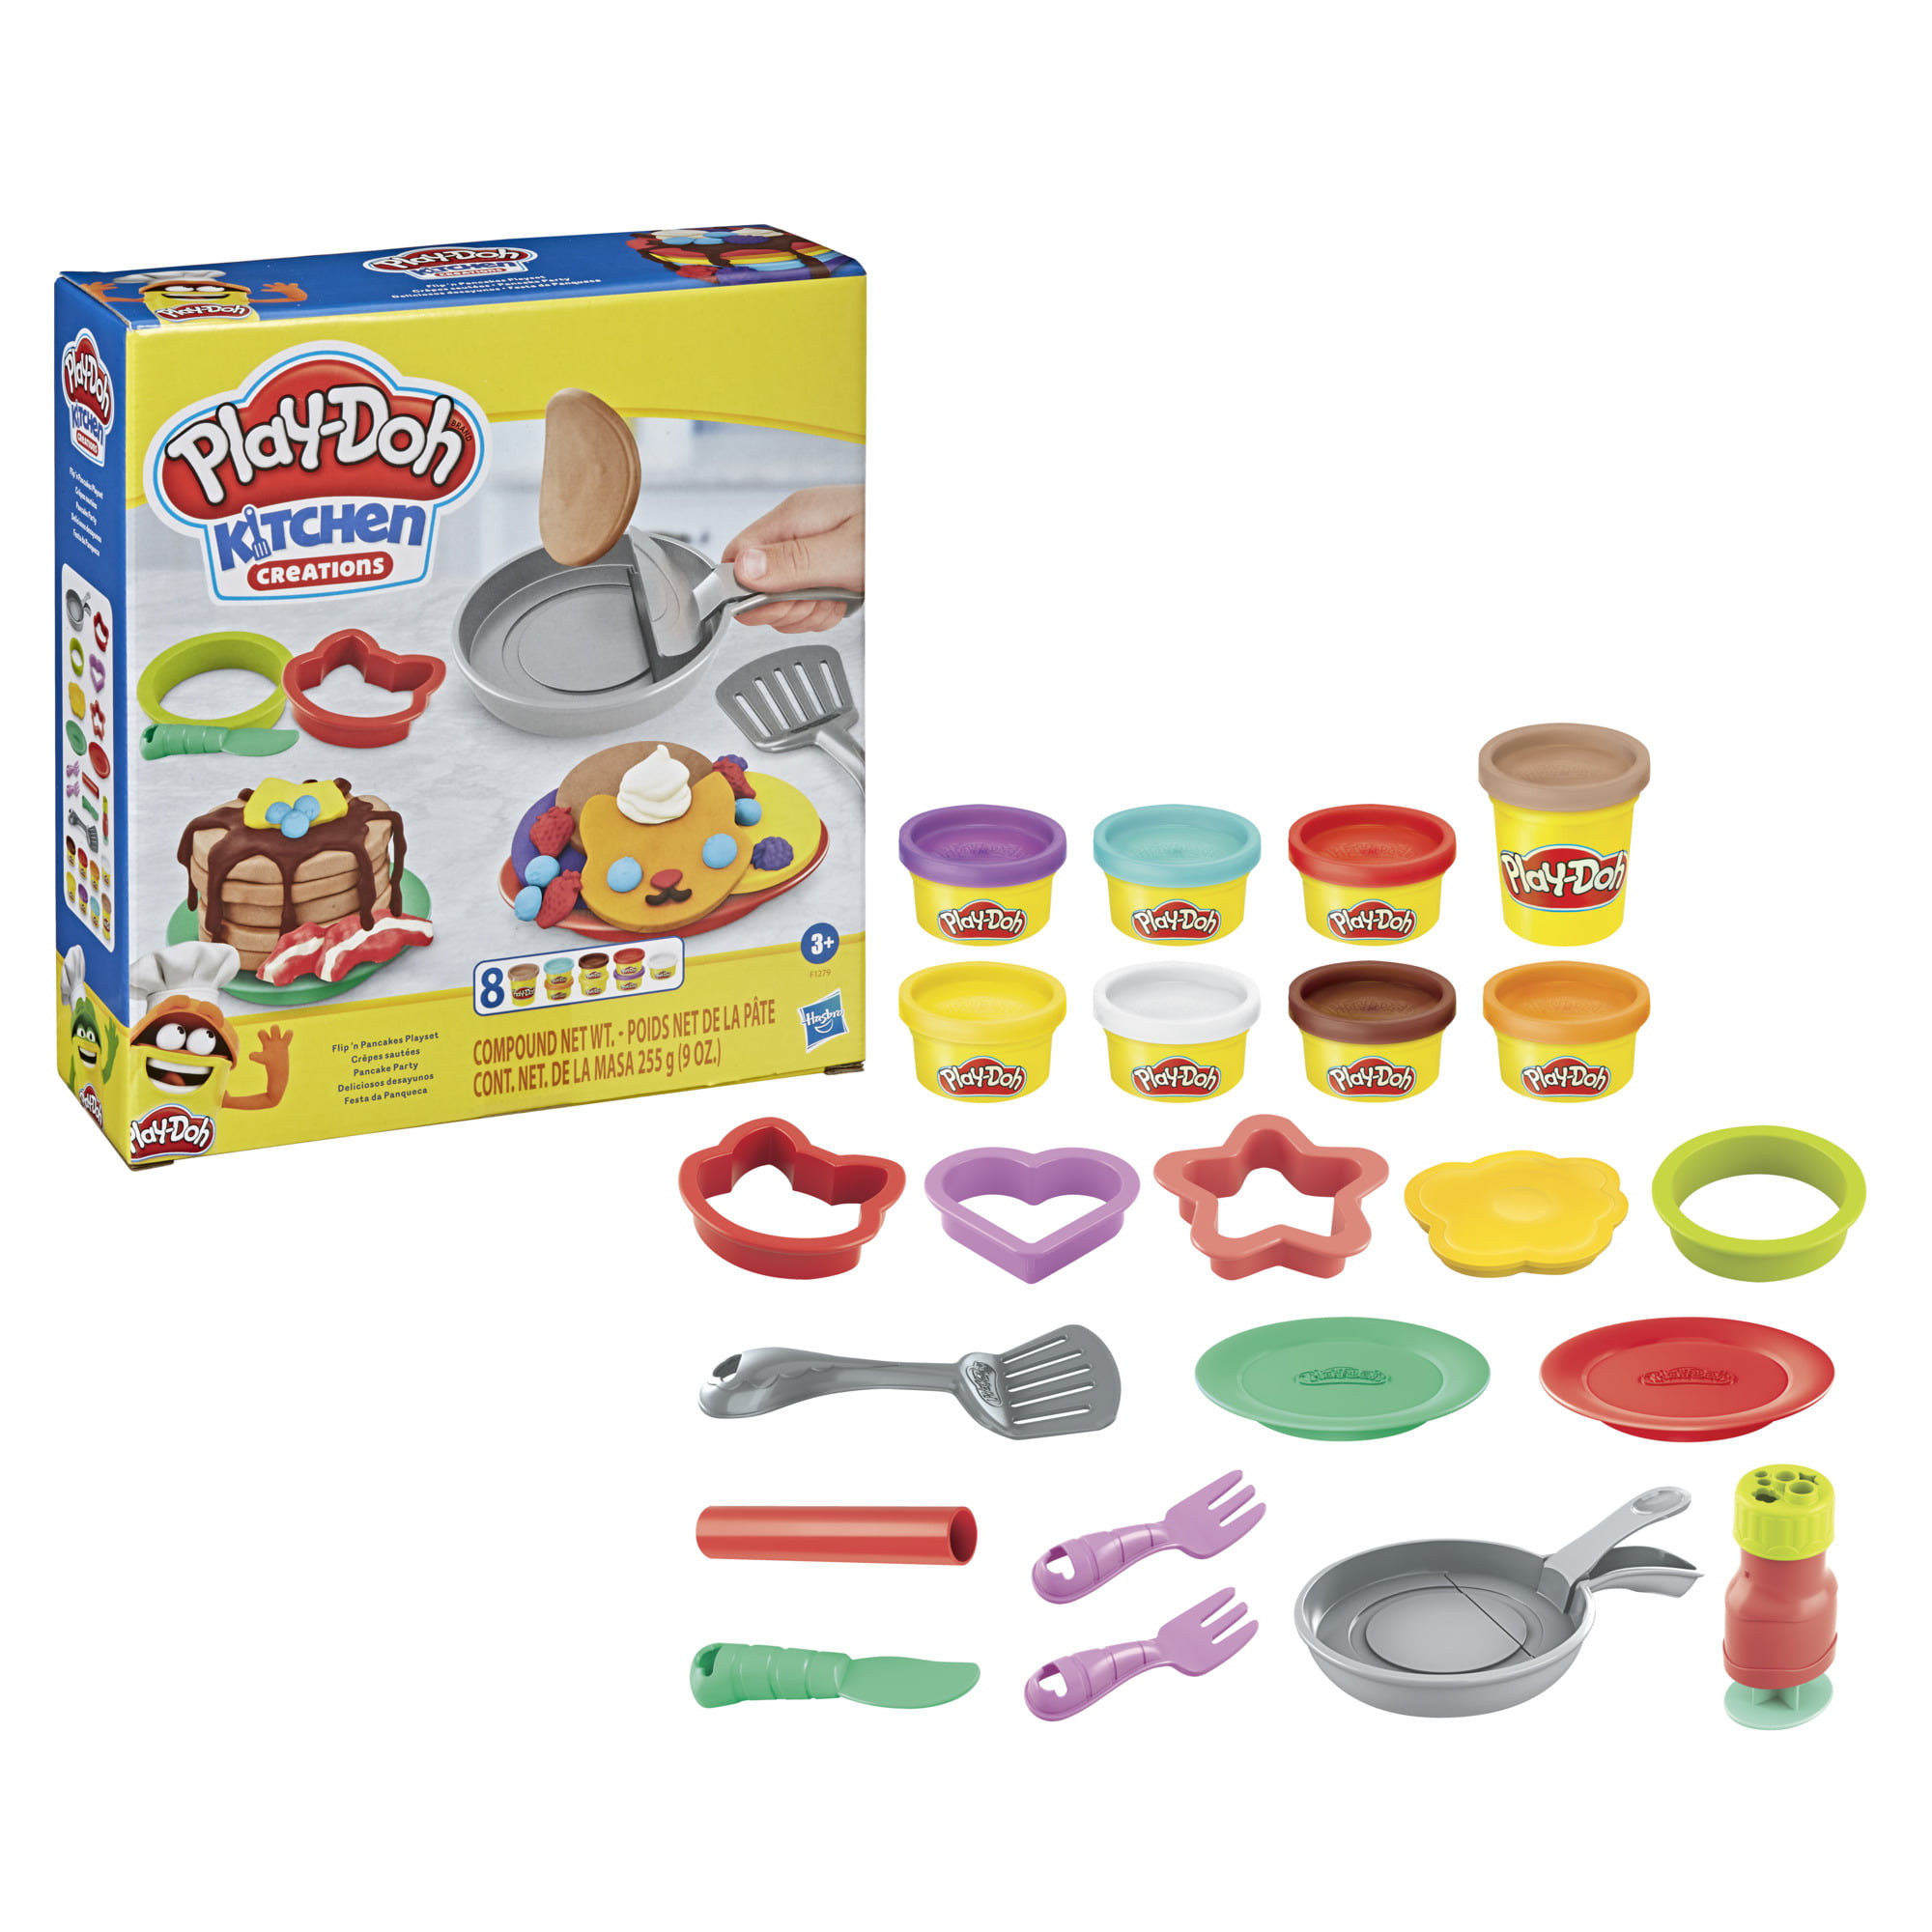 Play-Doh Kitchen Creations Flip 'n Pancakes Playset 8 Compounds 14 Tools Dec.1 